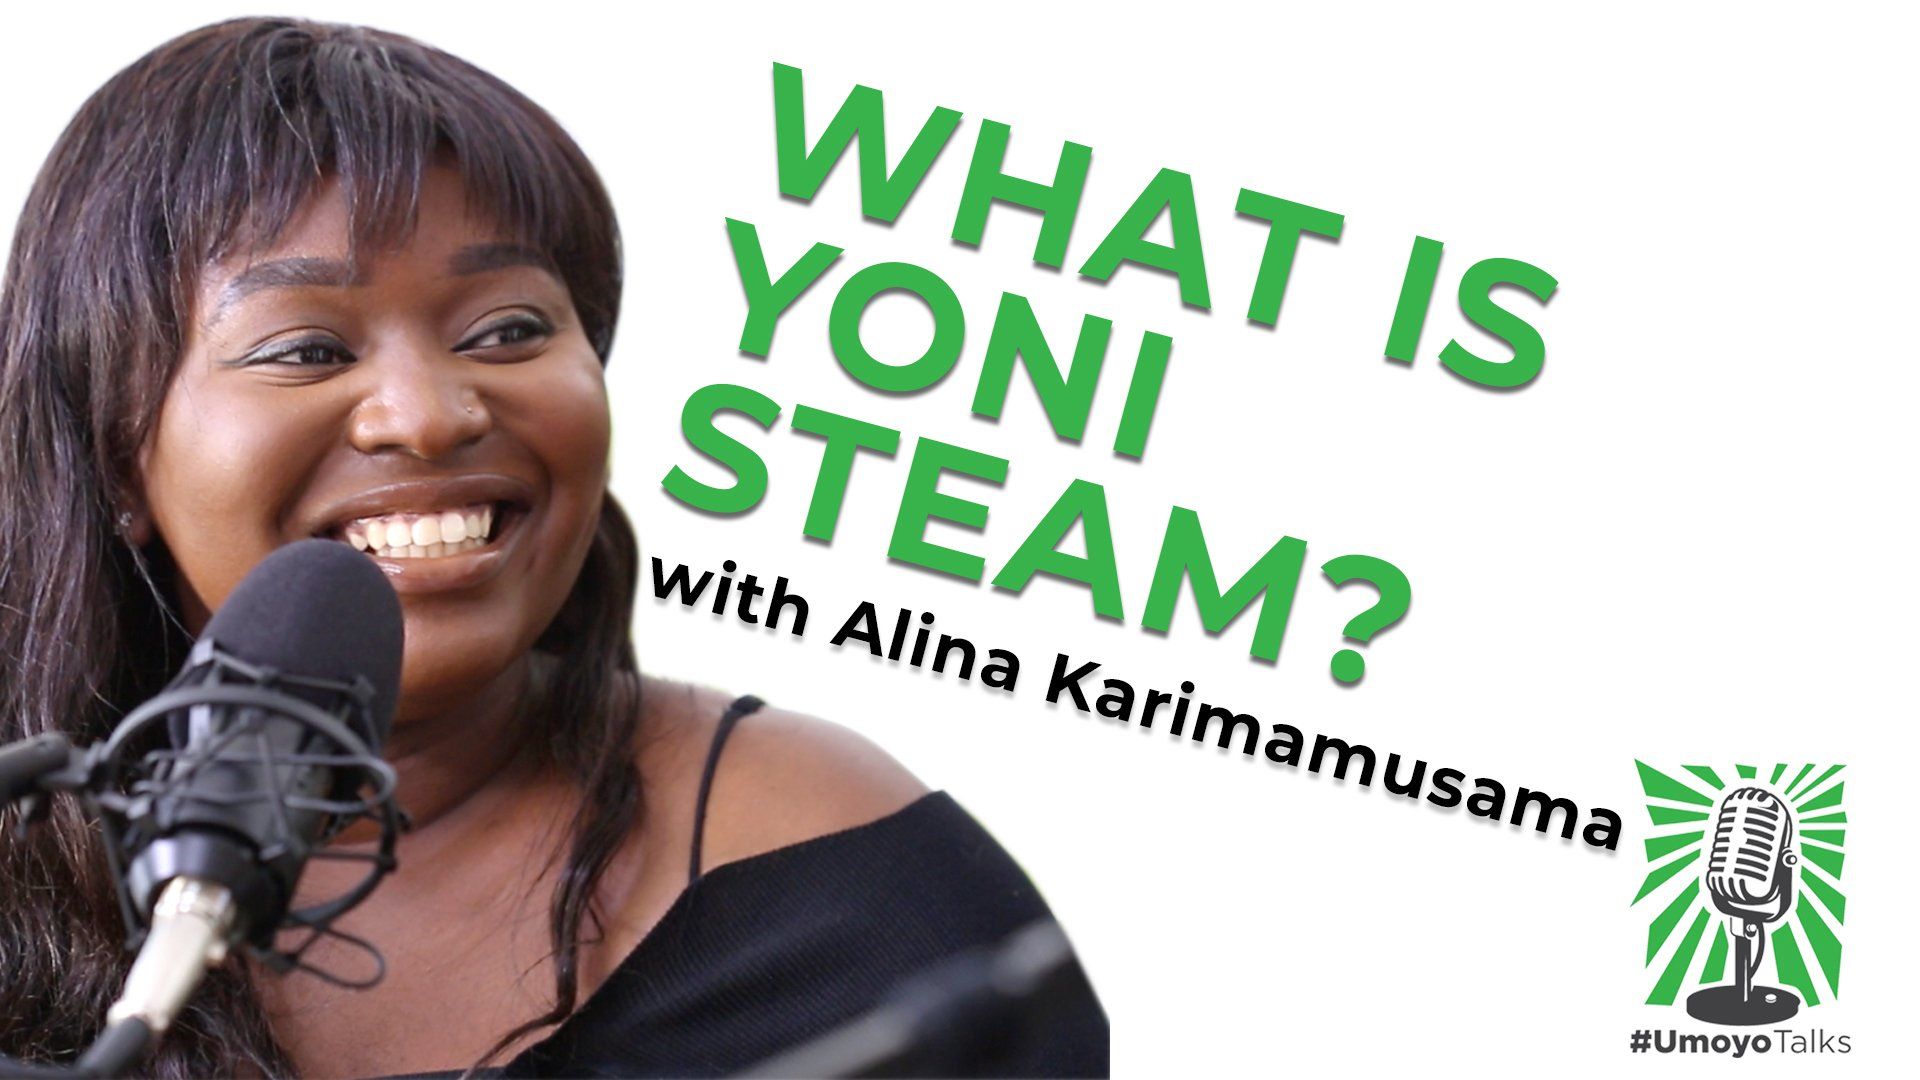 A woman is smiling in front of a microphone while talking about yoni steam